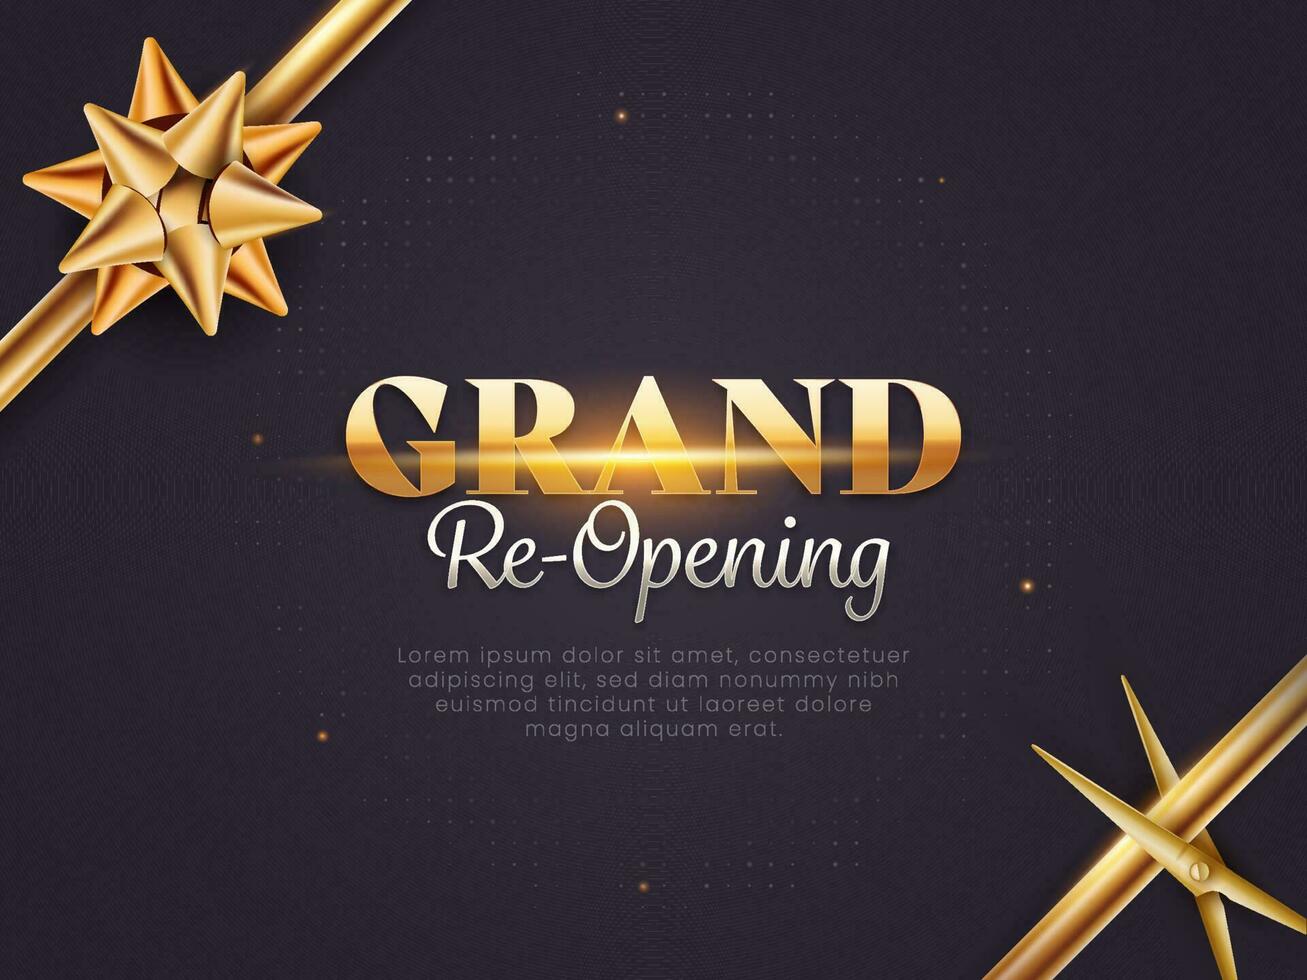 Grand Re-Opening Invitation Poster Layout With Golden Flower Ribbon And Scissor On Dark Puprle Background. vector